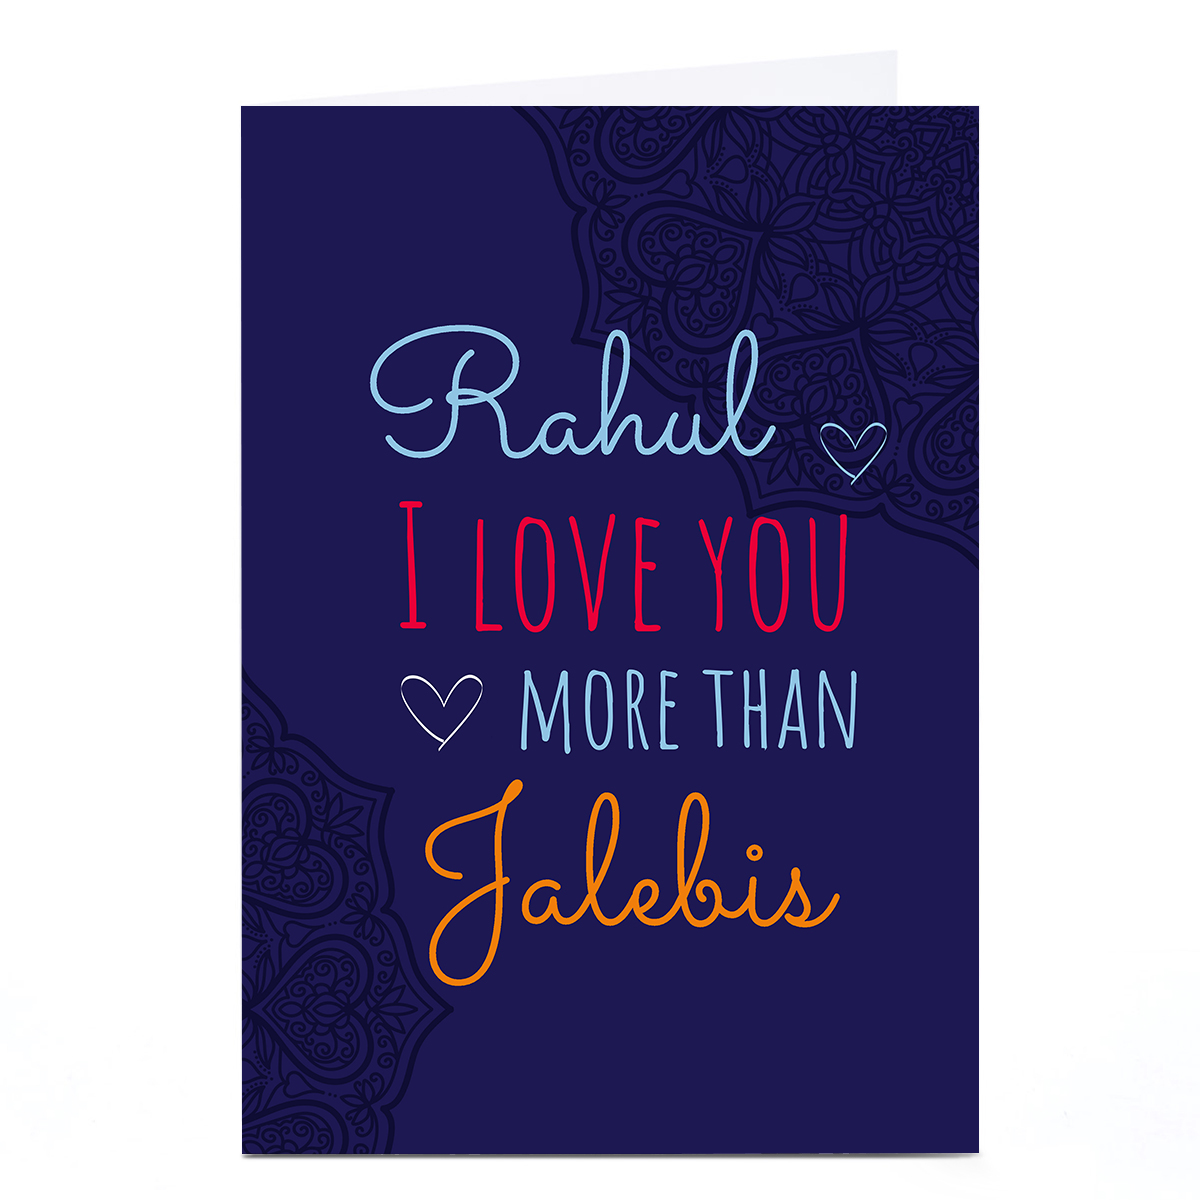 buy-personalised-roshah-designs-valentine-s-day-card-jalebis-for-gbp